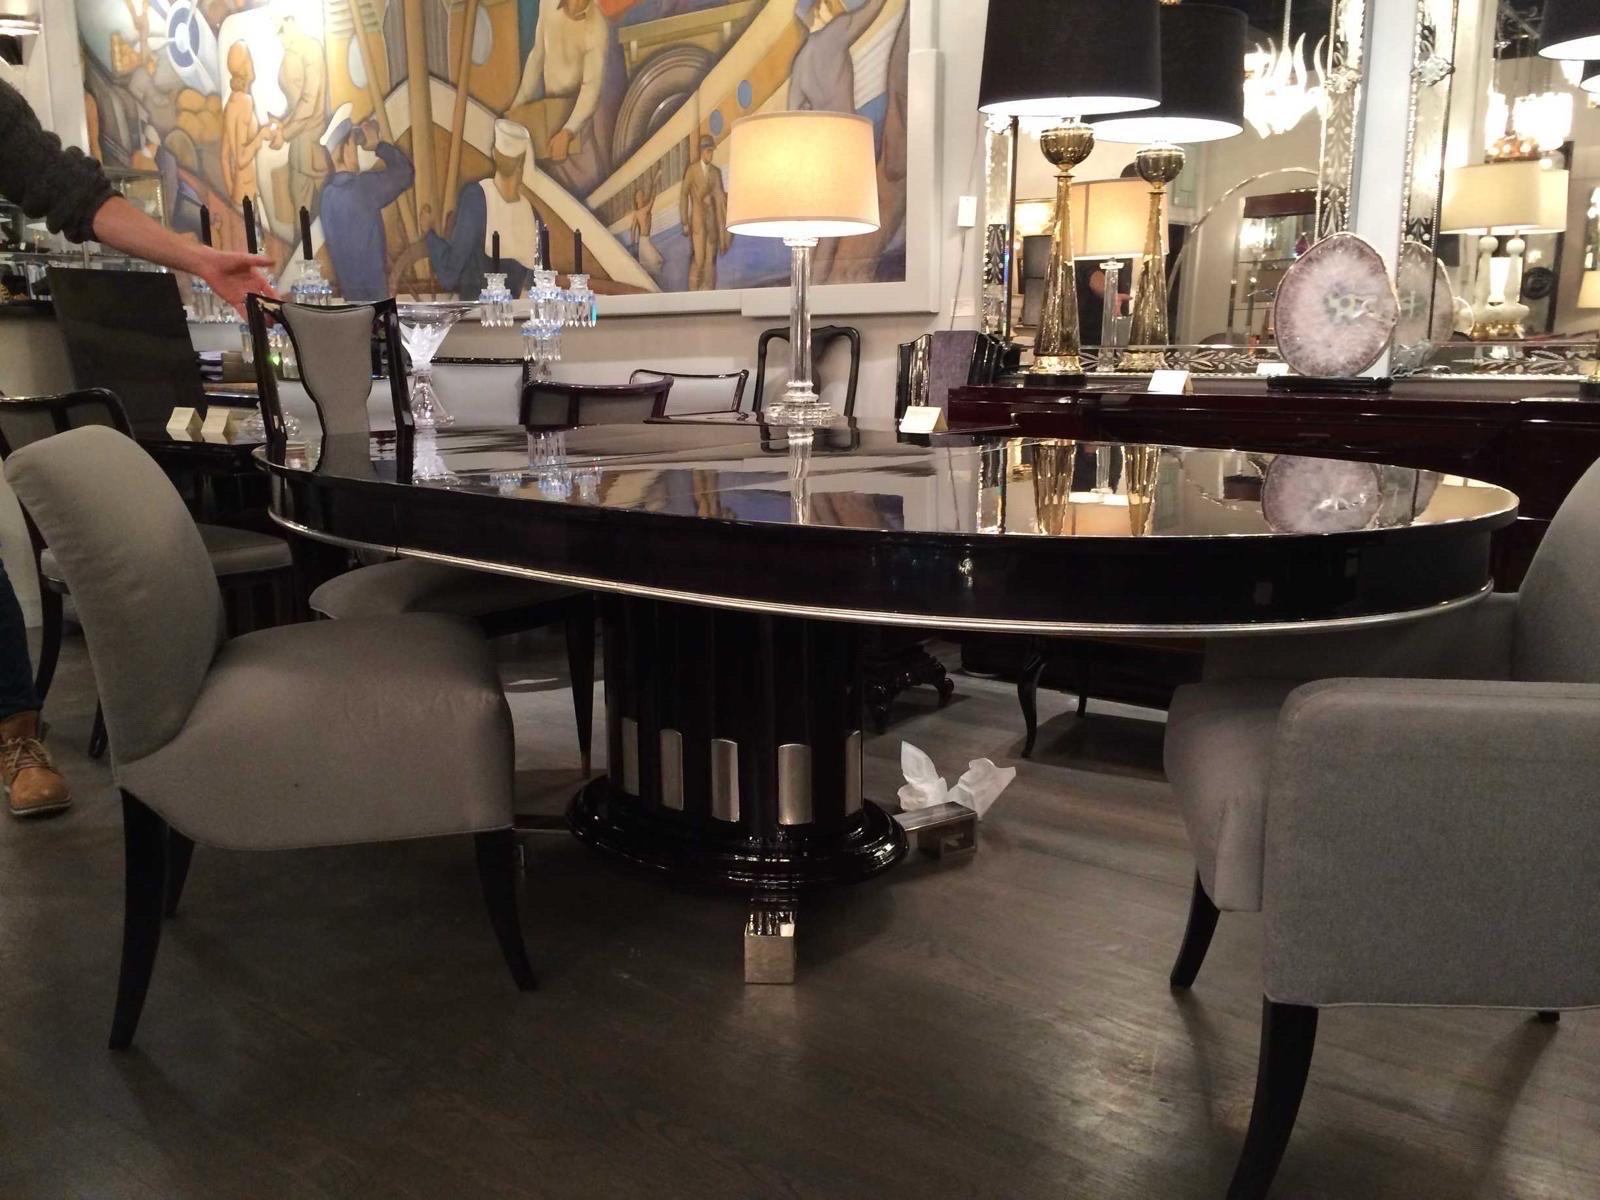 Art Deco Revival Ebonized Dining Table by Renzo Rutili for Johnson Furniture, c. 1940.
Highly Stylized Dining Table in Ebonized Mahogany with silver leaf details. Table has fluted column base design and nickeled bronze greek key motif feet. Table